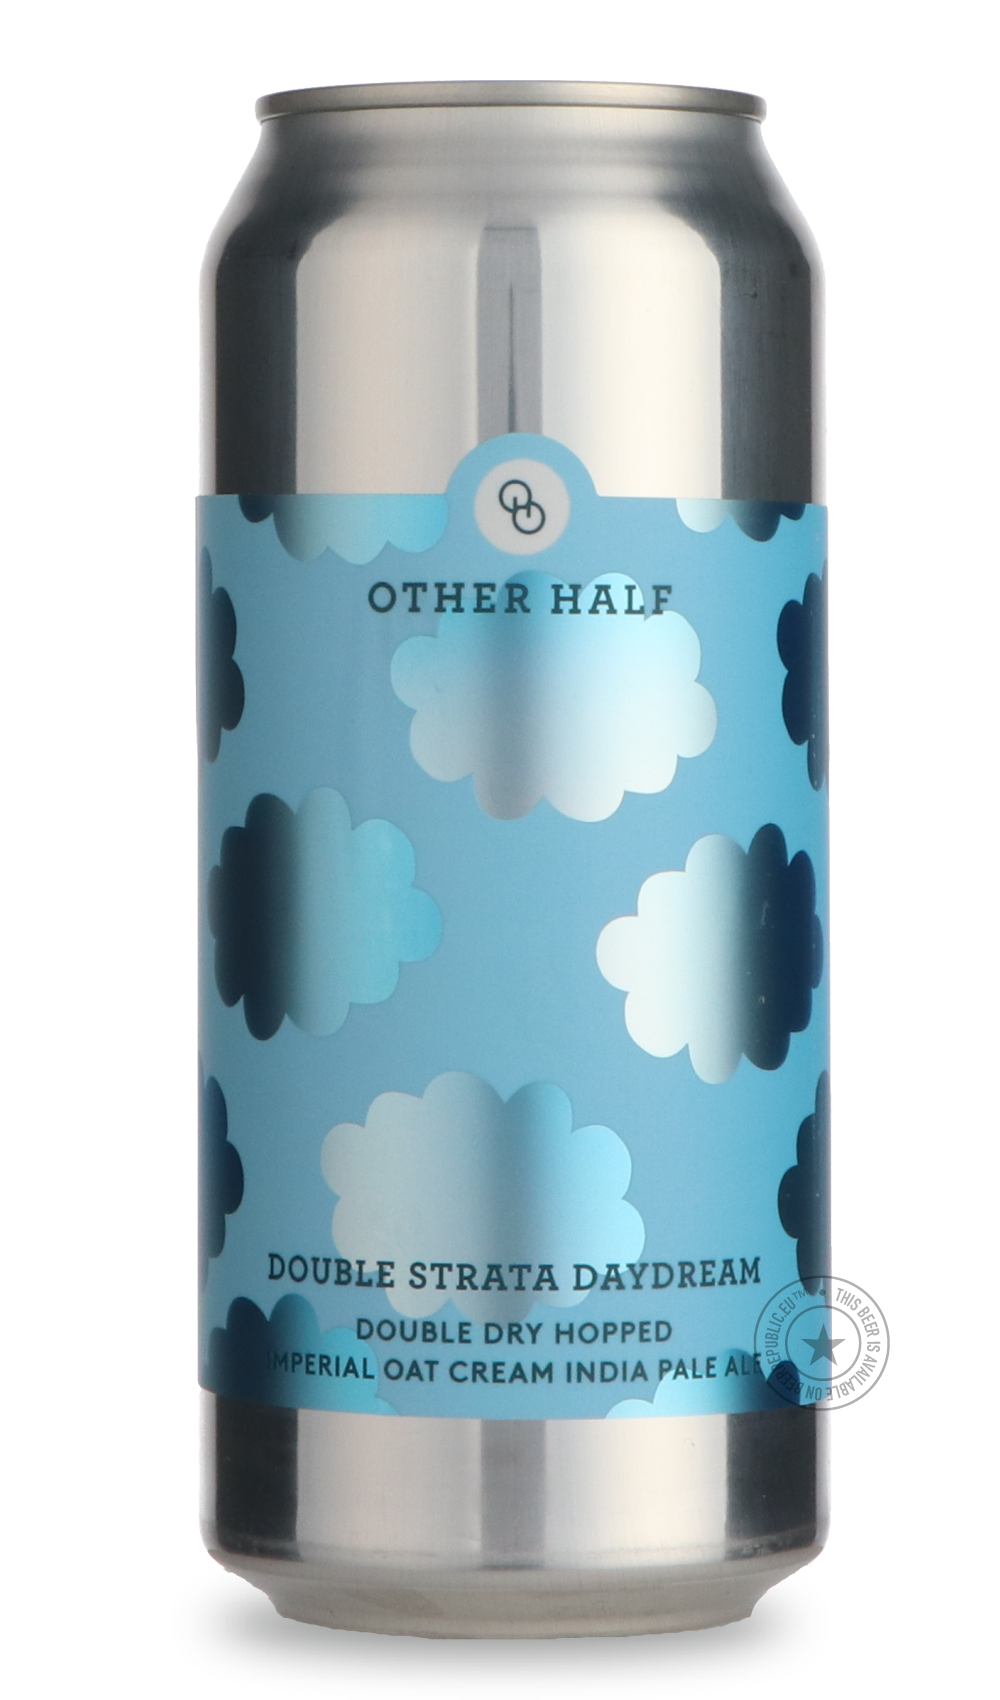 -Other Half- DDH Double Strata Daydream-IPA- Only @ Beer Republic - The best online beer store for American & Canadian craft beer - Buy beer online from the USA and Canada - Bier online kopen - Amerikaans bier kopen - Craft beer store - Craft beer kopen - Amerikanisch bier kaufen - Bier online kaufen - Acheter biere online - IPA - Stout - Porter - New England IPA - Hazy IPA - Imperial Stout - Barrel Aged - Barrel Aged Imperial Stout - Brown - Dark beer - Blond - Blonde - Pilsner - Lager - Wheat - Weizen - A